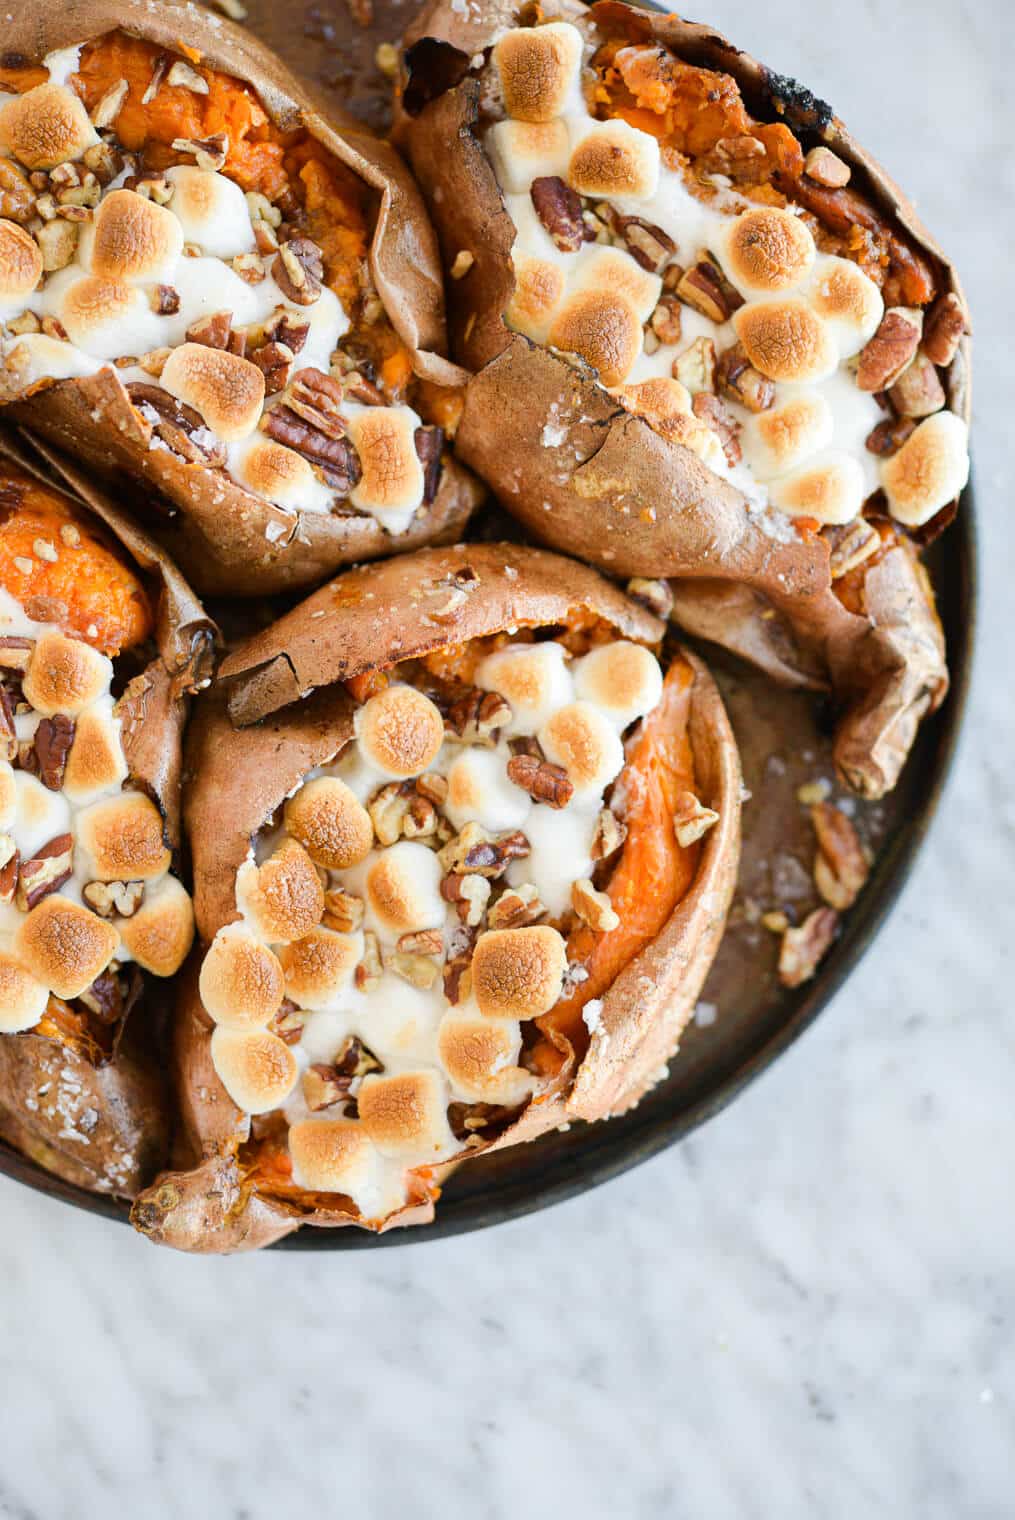 top view of marshmallow and pecan topped baked sweet potatoes